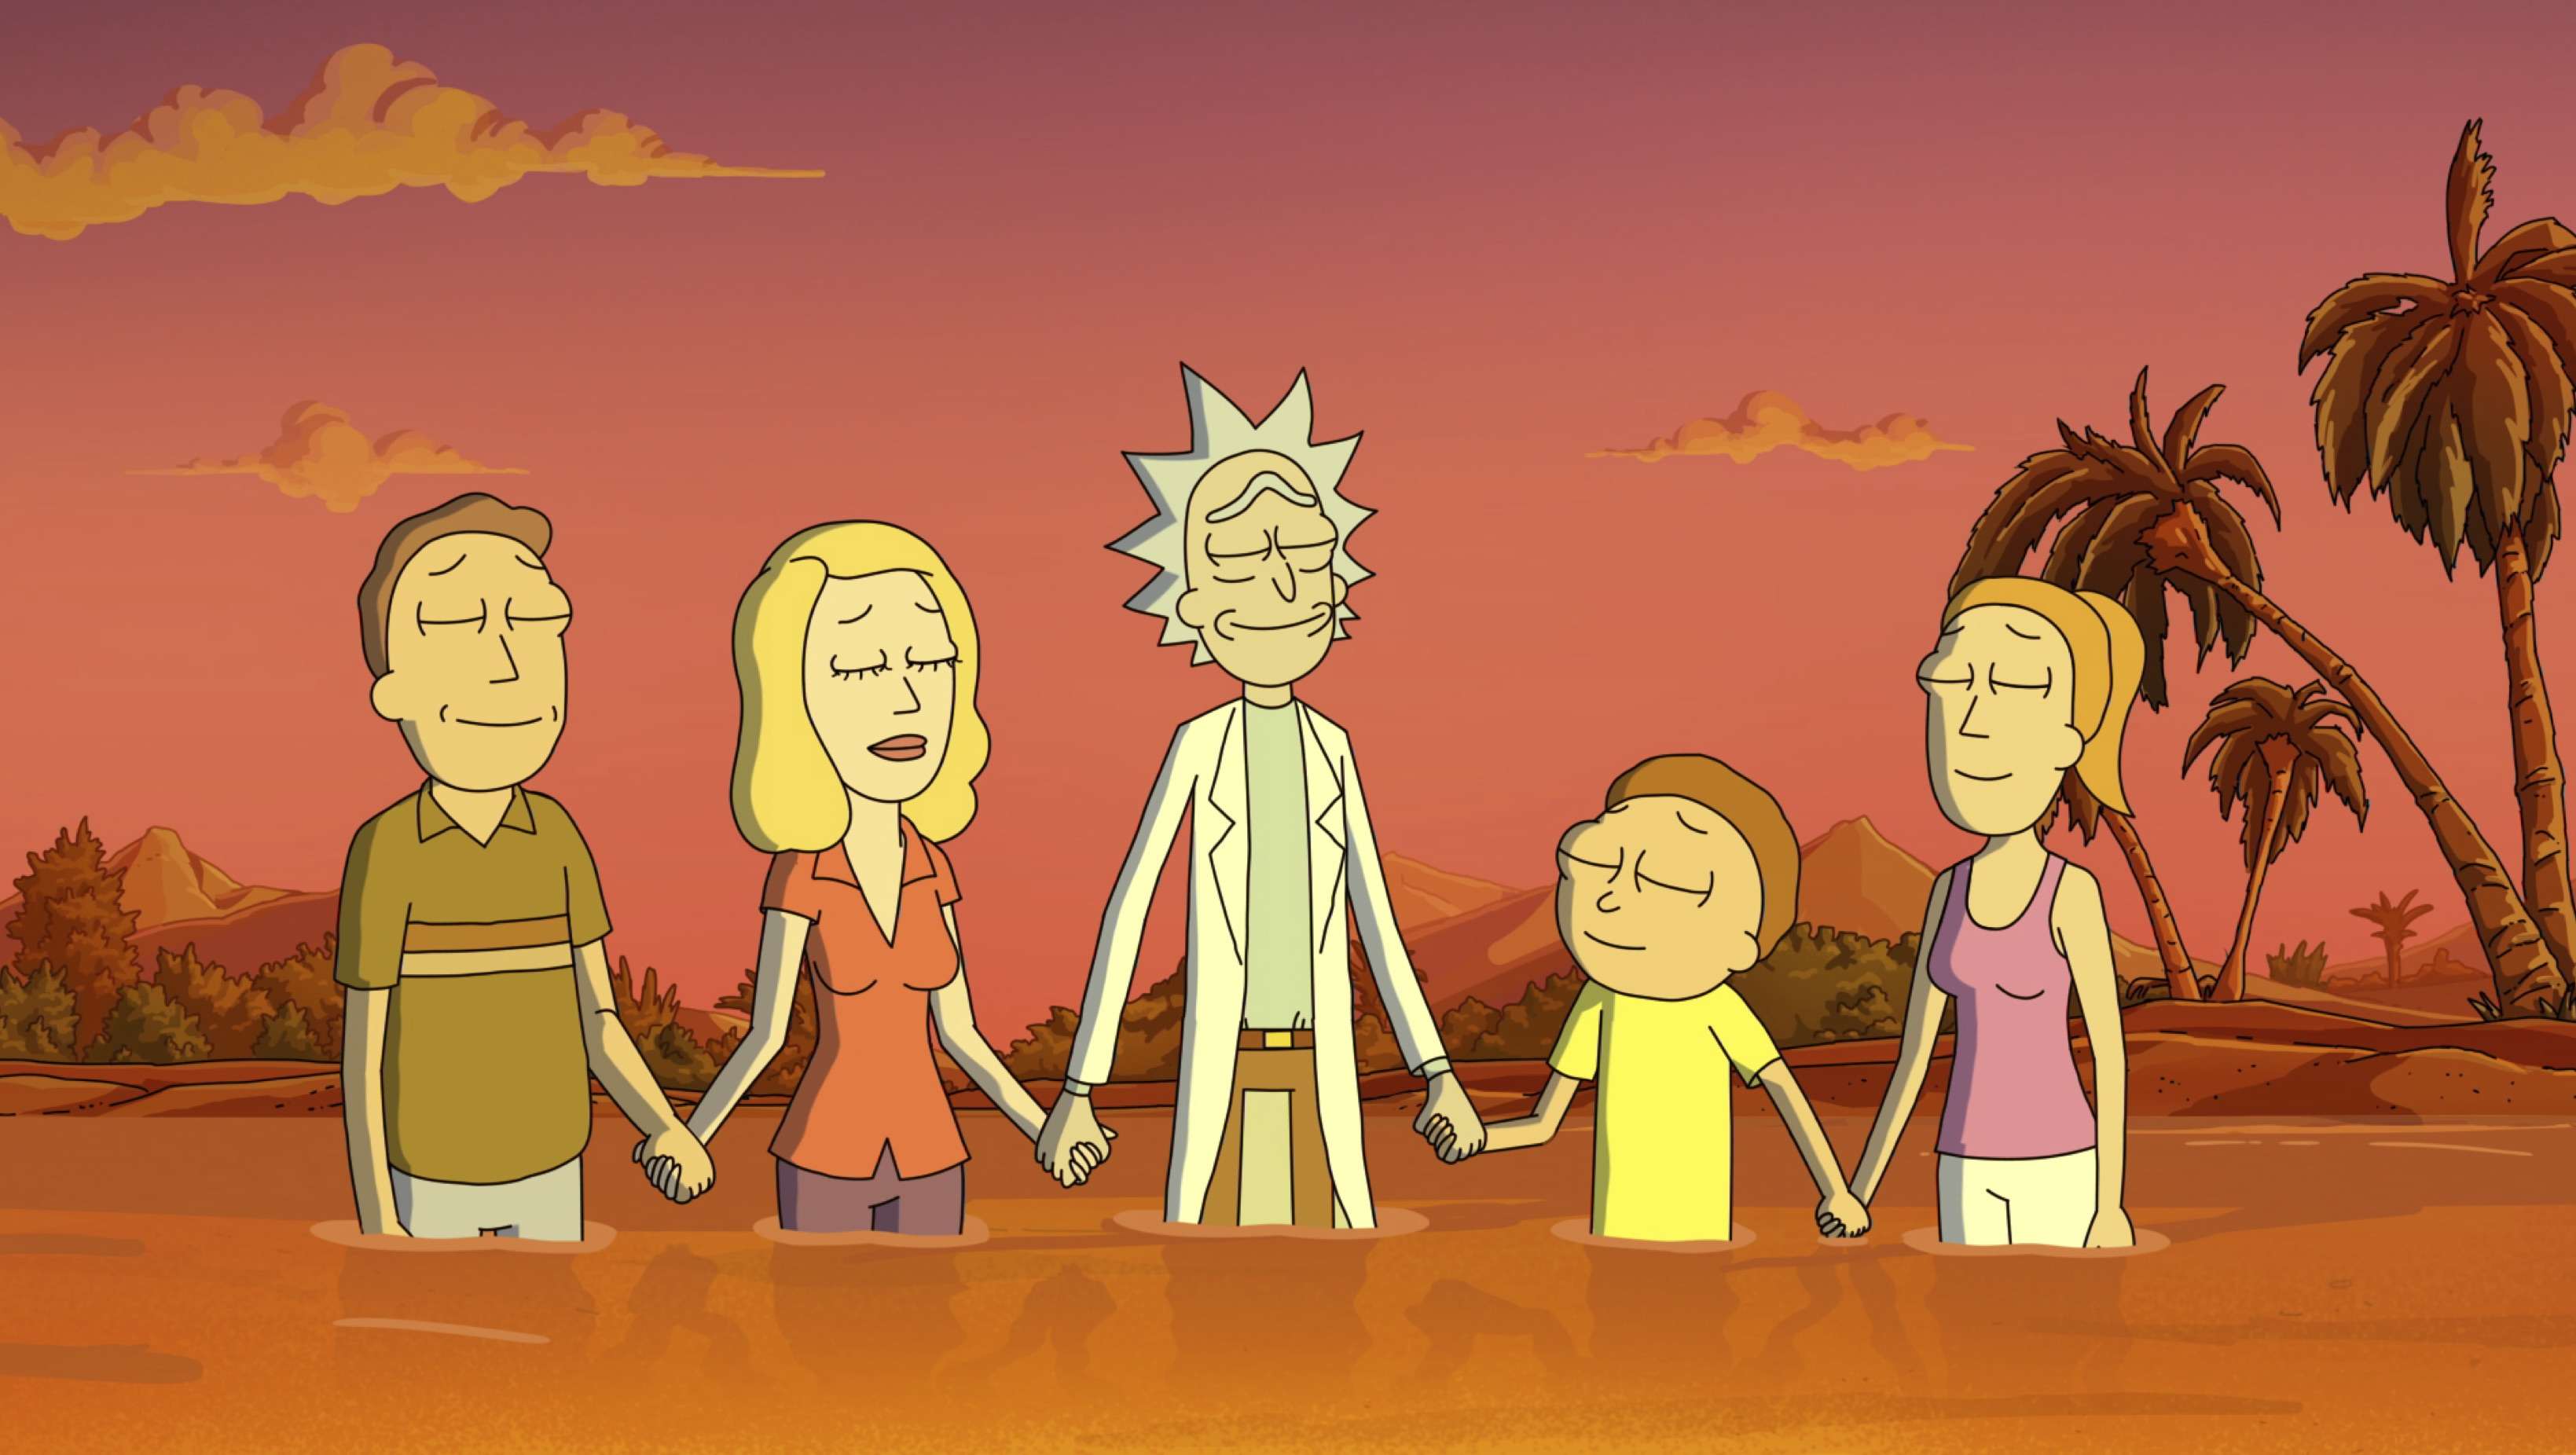 Watch It Here: Adult Swim Drops Entire Rick and Morty Season 6 Premiere  Online - That Park Place